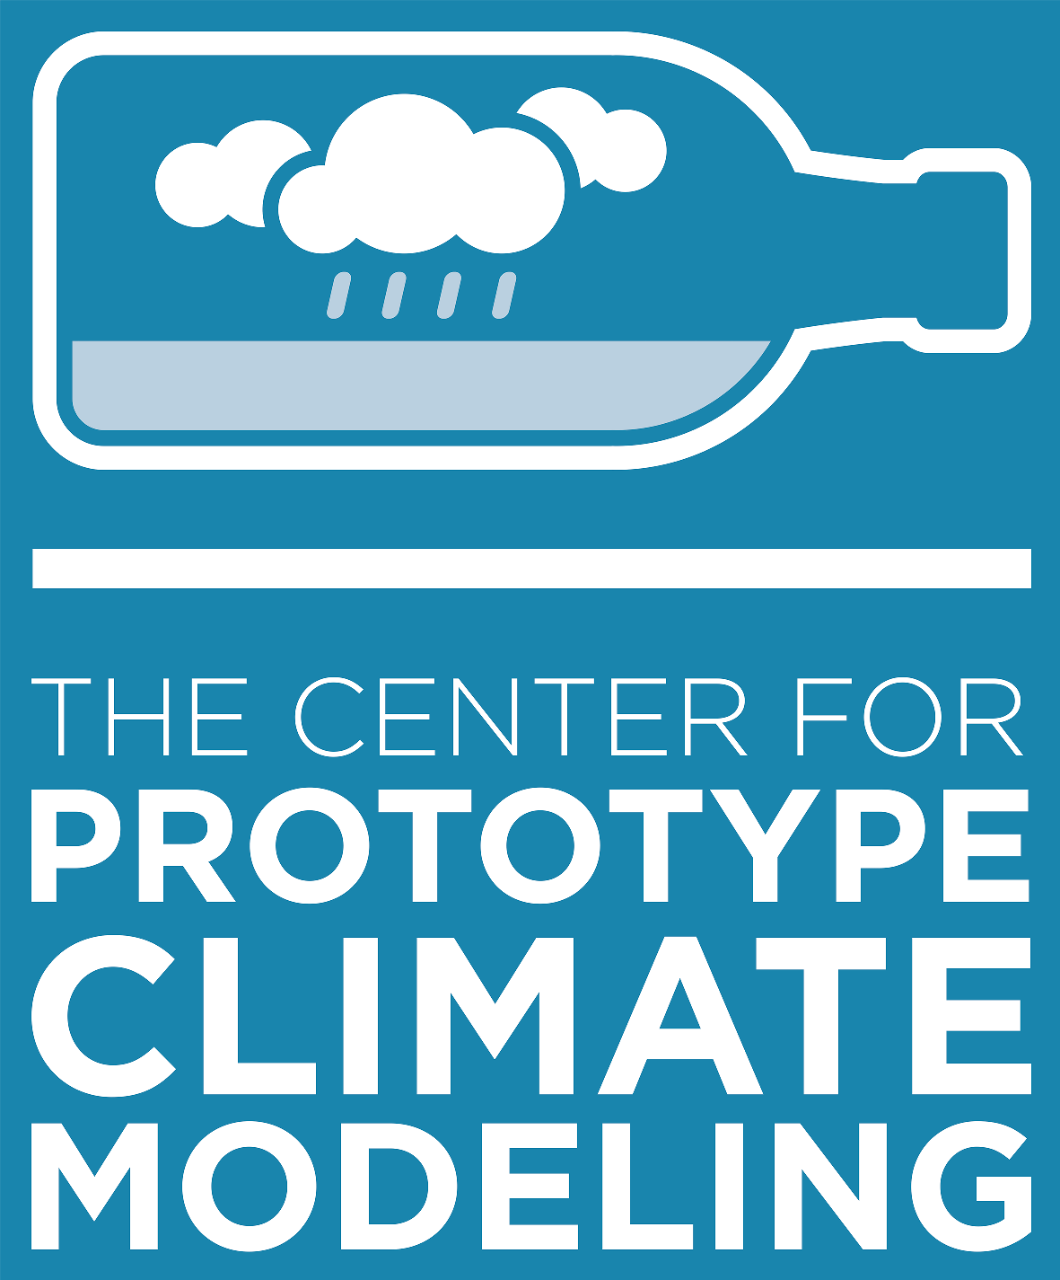 https://nyuad.nyu.edu/en/research/centers-labs-and-projects/the-center-for-prototype-climate-modeling.html